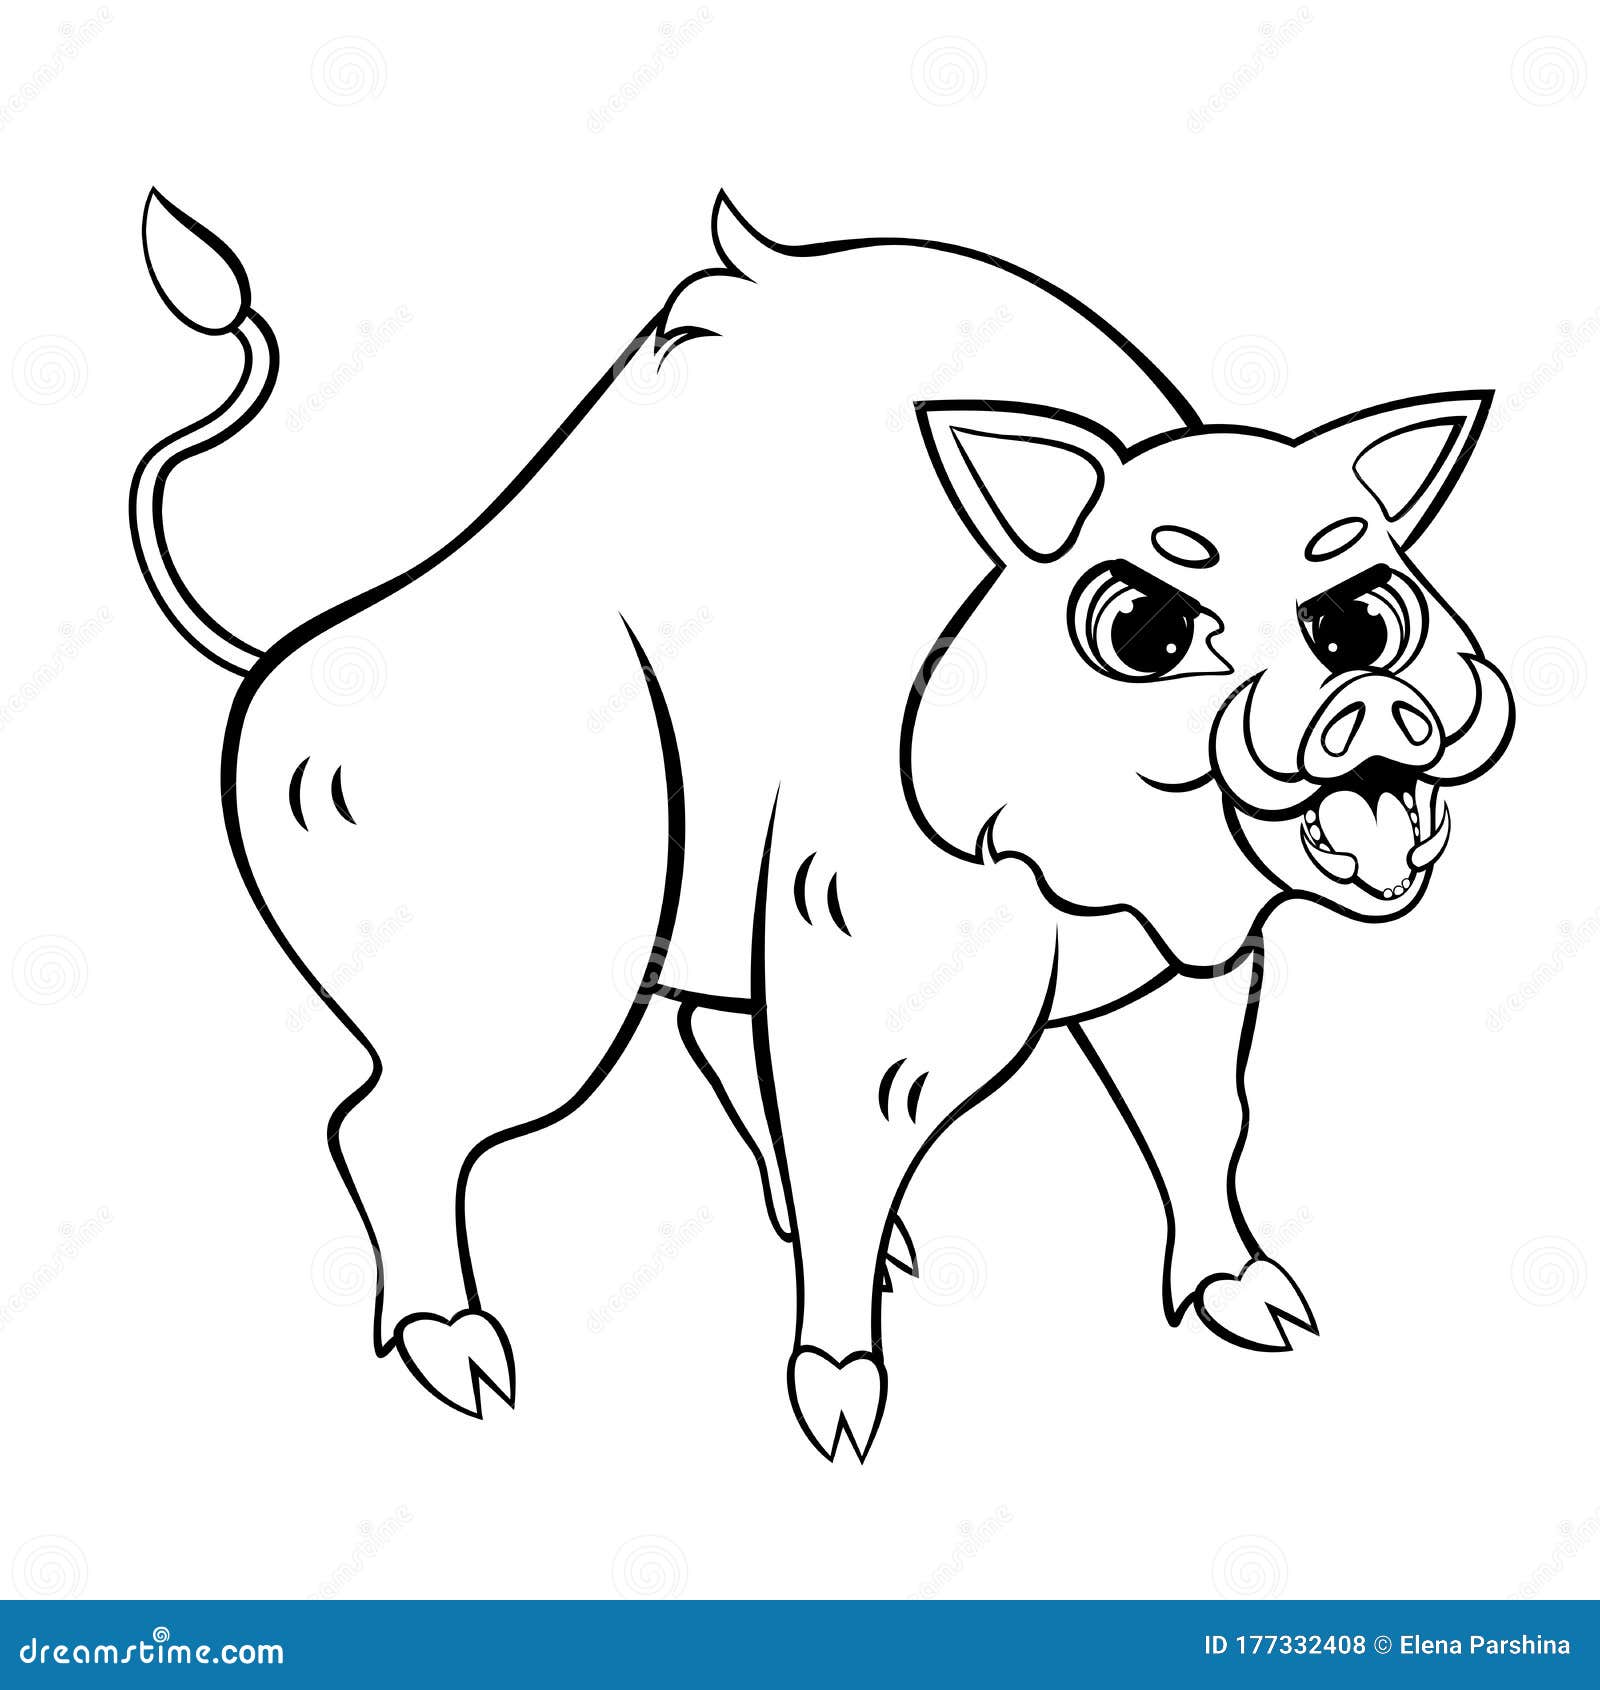 Cartoon Wild Boar Vector Coloring Page Outline. Angry Hog. Coloring